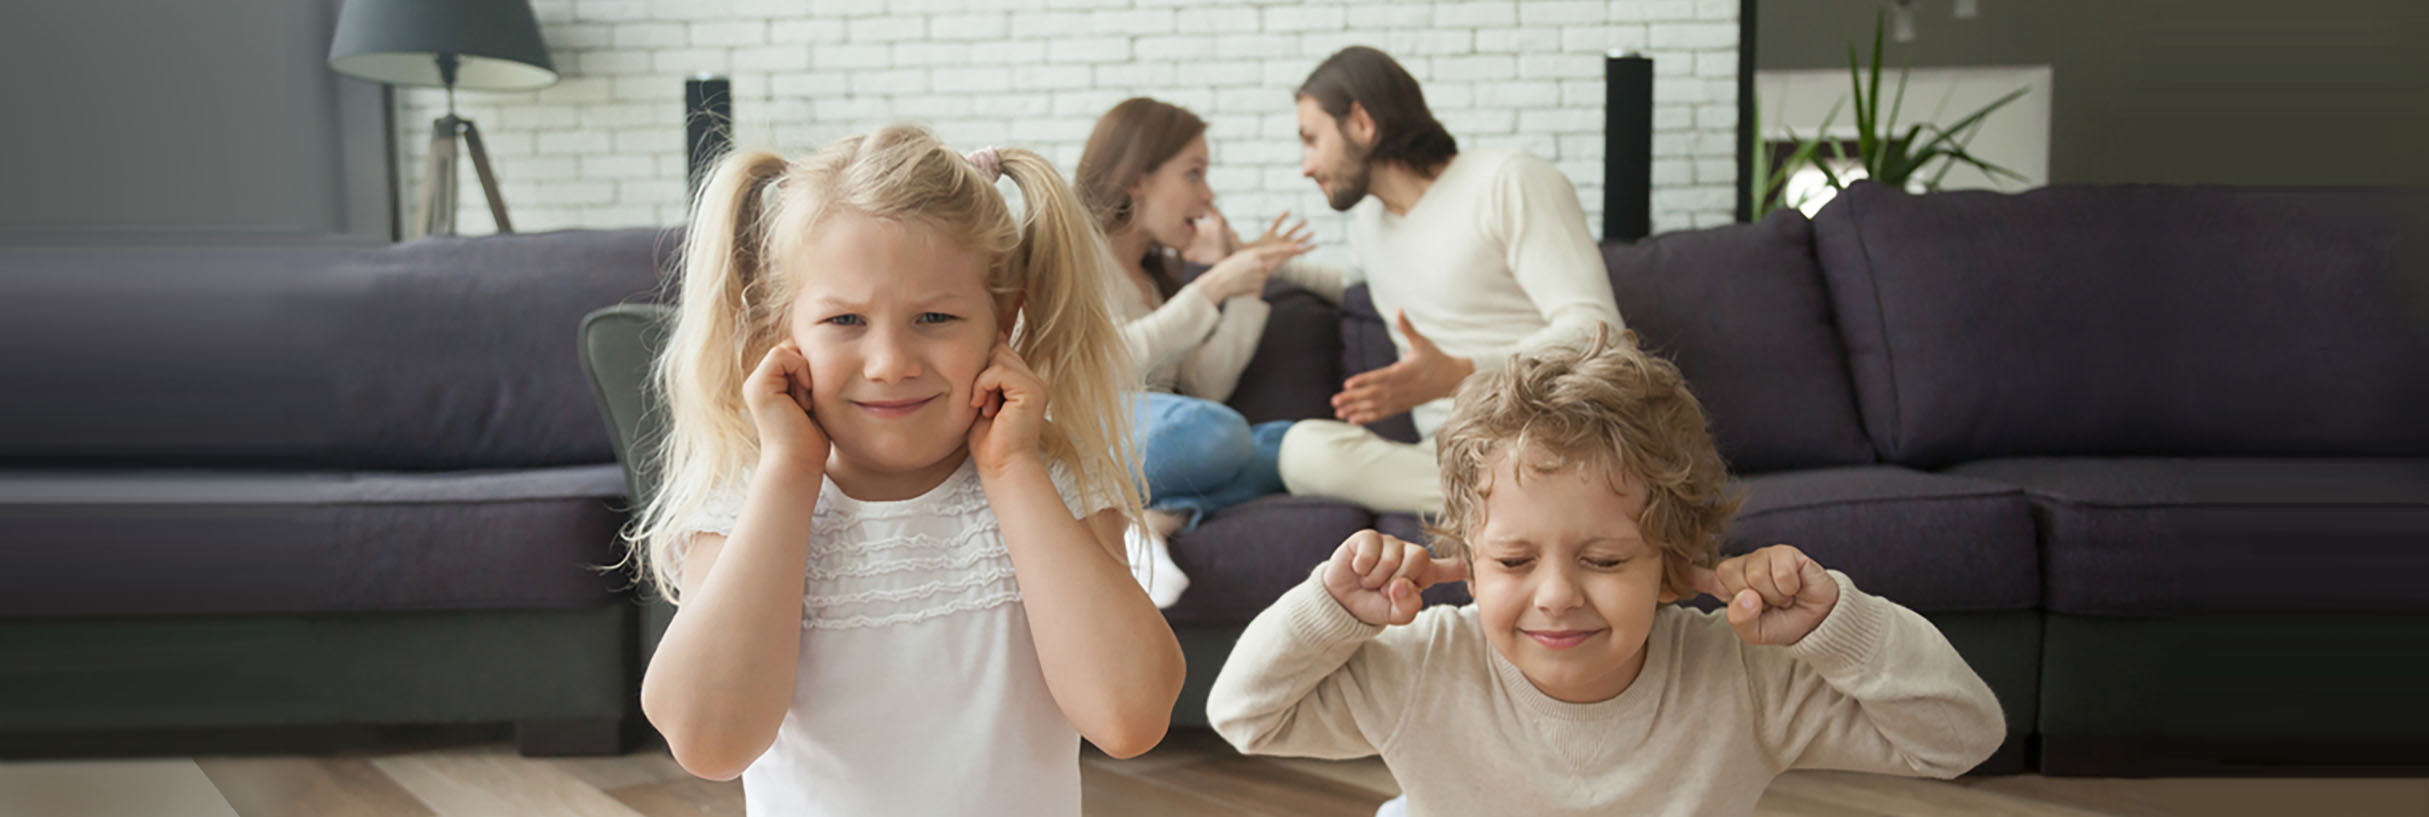 image-of-stressed-children-hearing-parents-argue